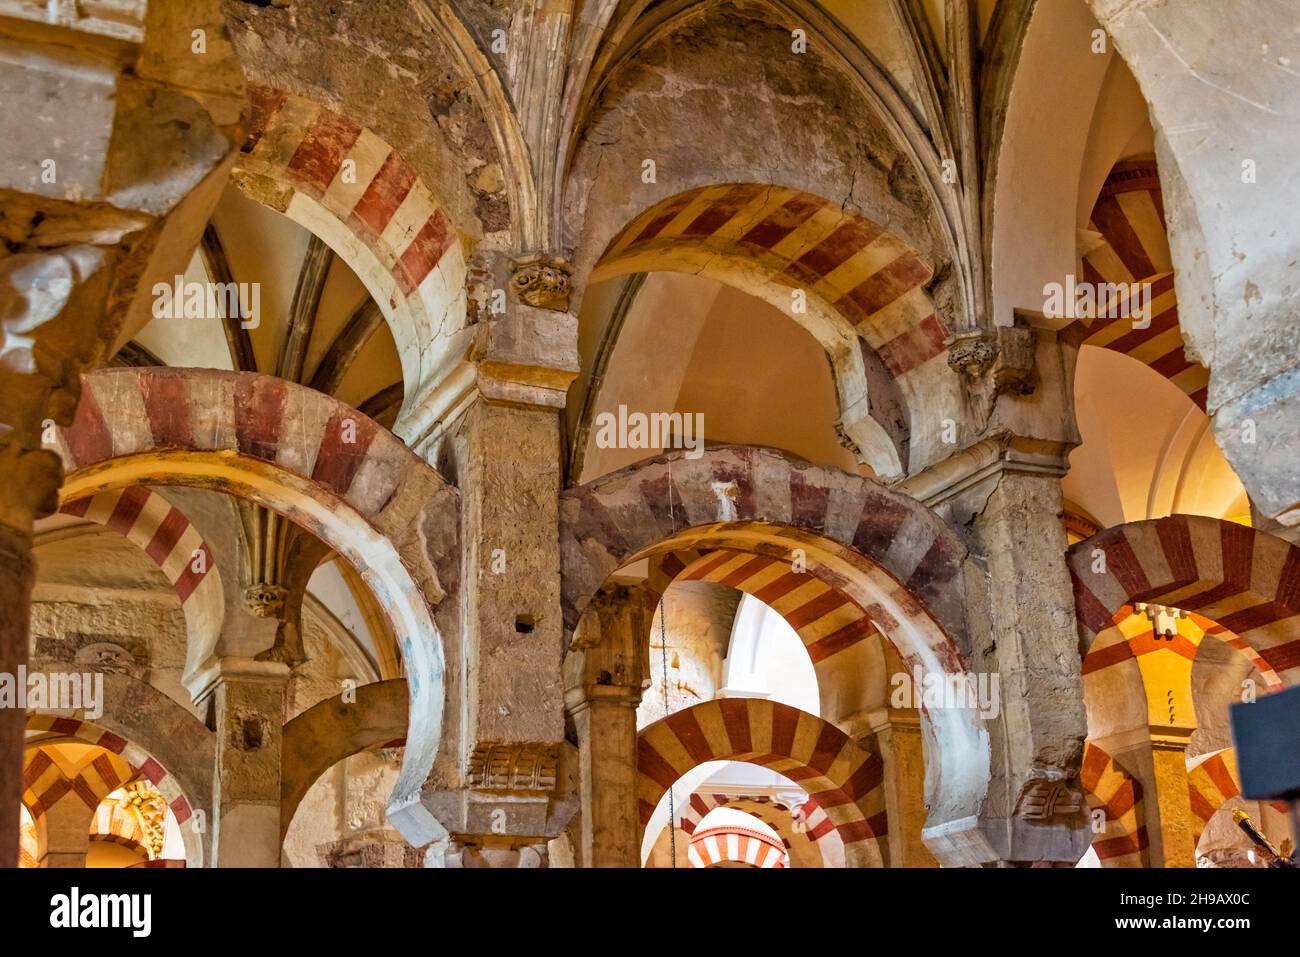 Prayer Hall with two-tiered arches in Mezquita-Cathedral (Mosque-Cathedral or Great Mosque of Cordoba), Cordoba, Cordoba Province, Spain Stock Photo